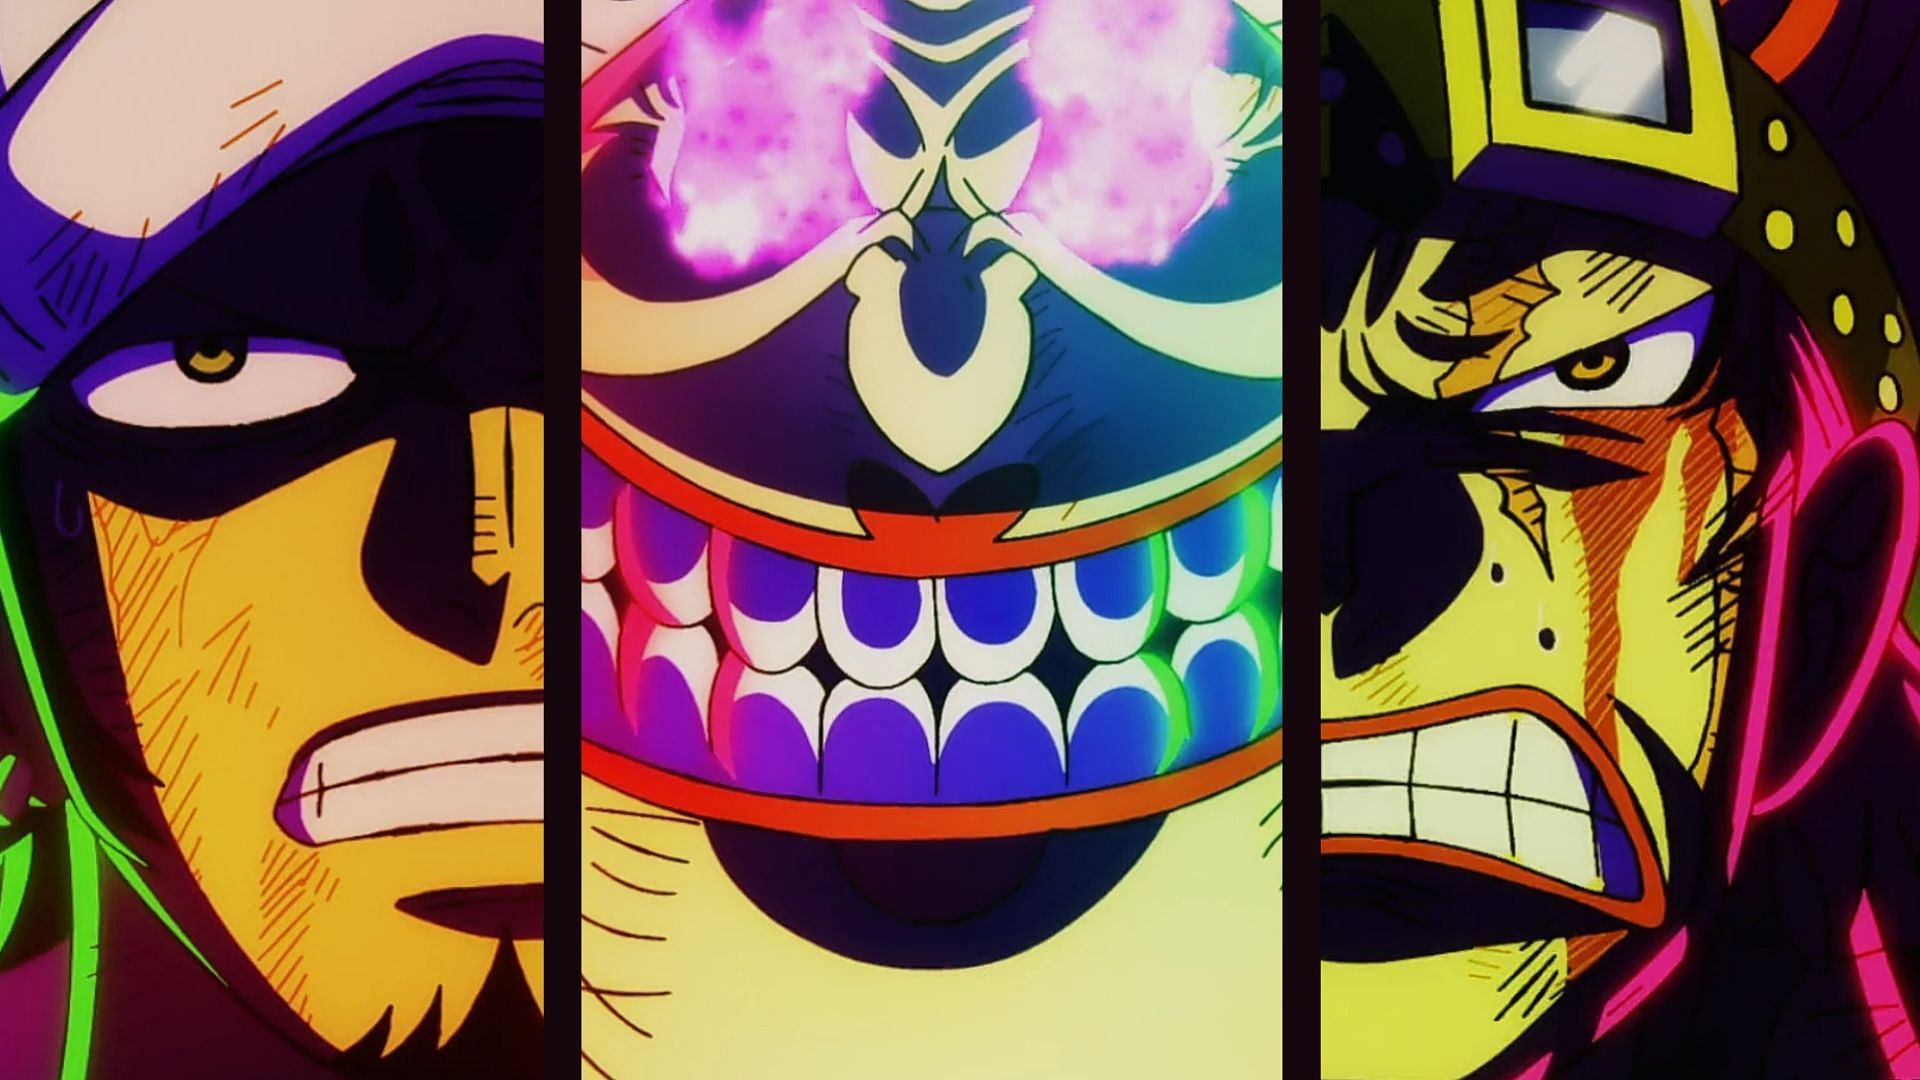 Law, Big Mom, and Kid as seen in the anime (Image via Toei Animation)